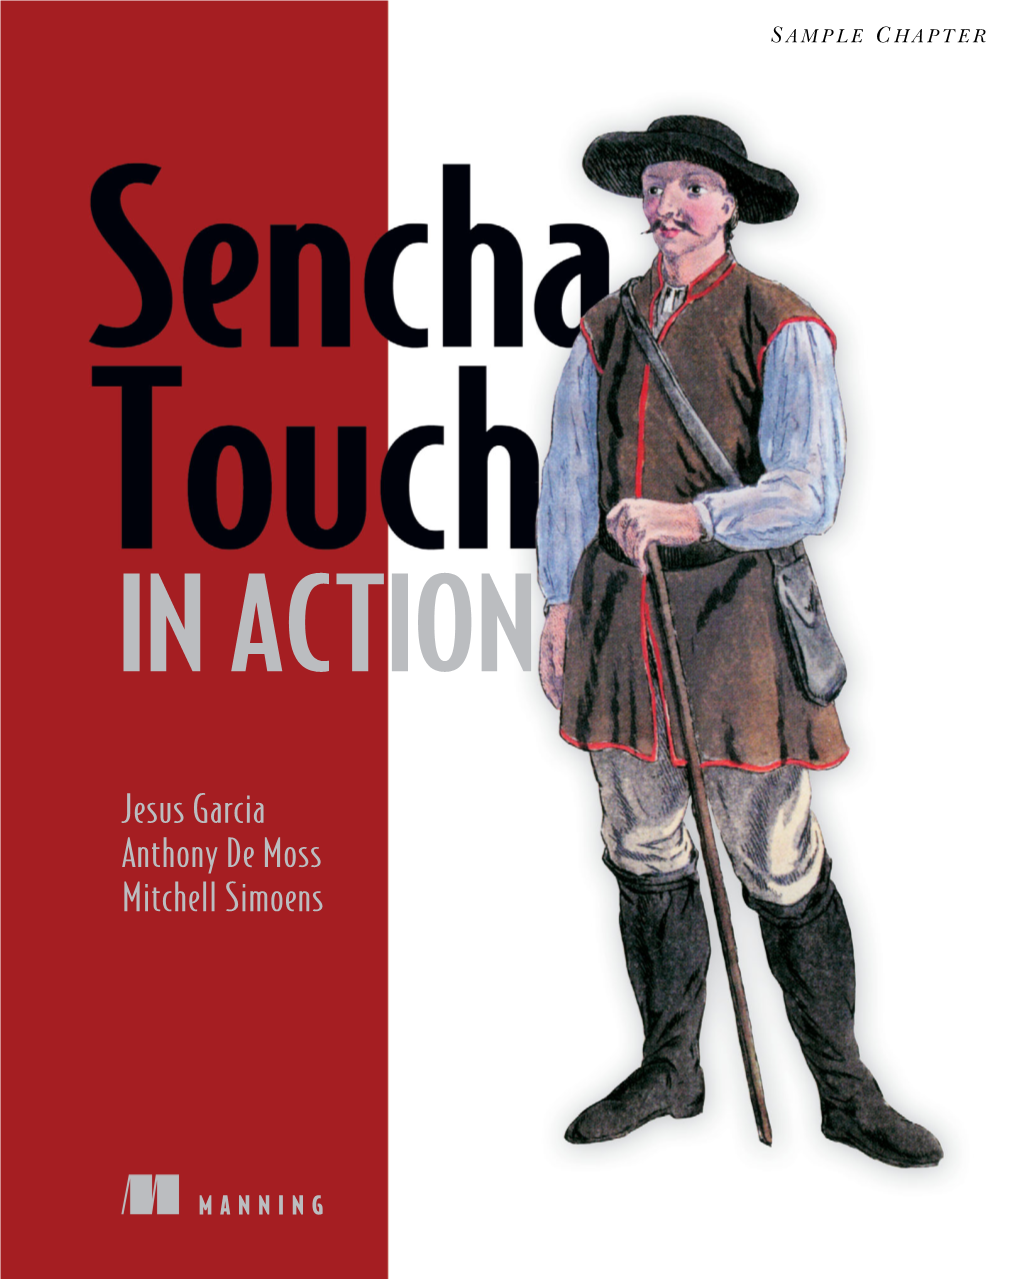 Sencha Touch in Action by Jesus Garcia Anthony De Moss Mitchell Simoens